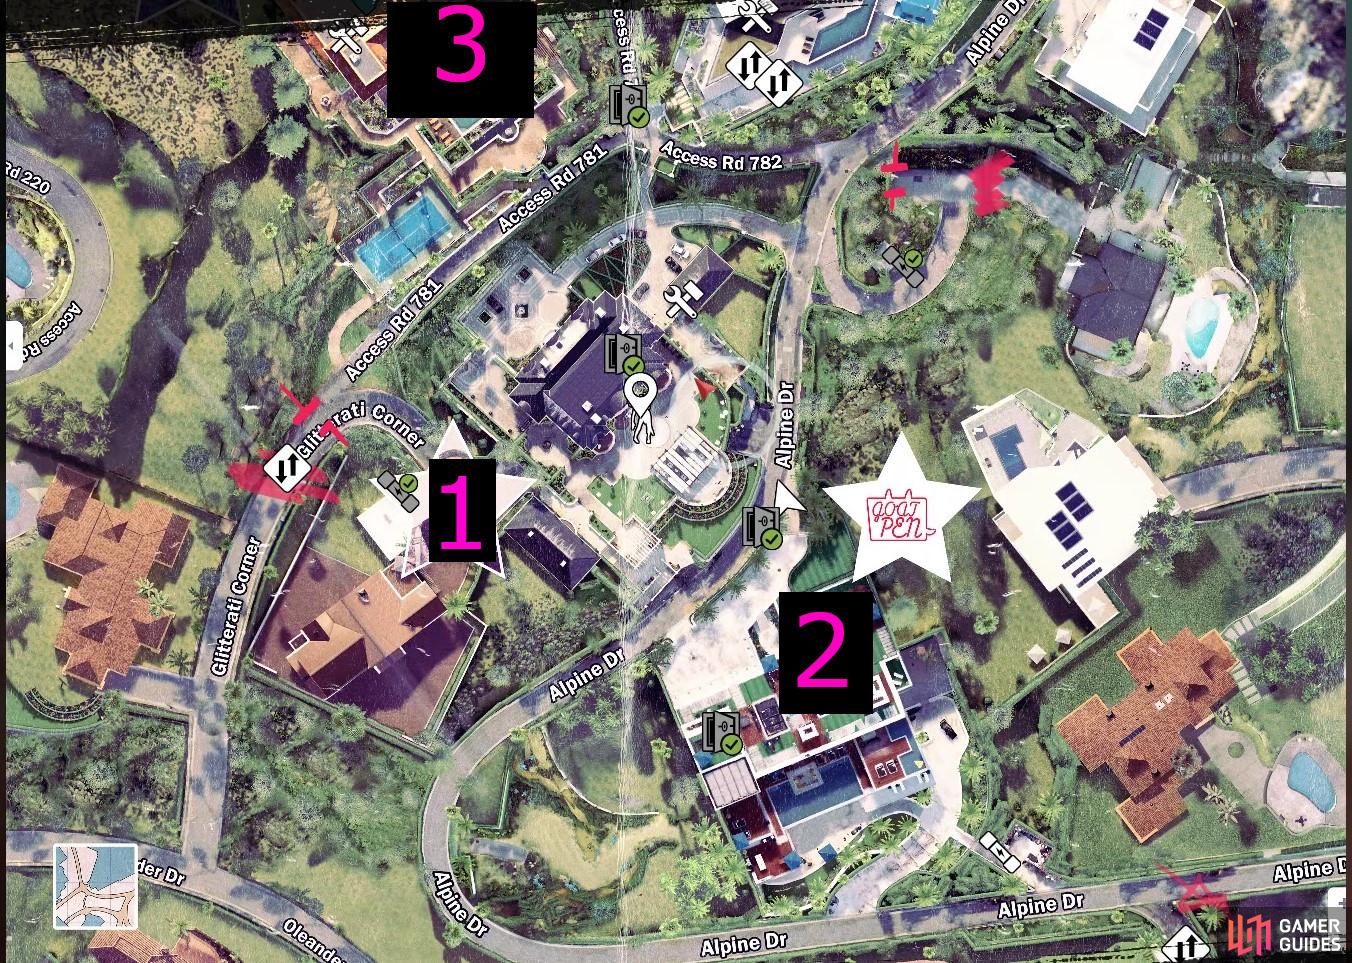 Here is a quick reference map to show you where you need to go in the My Mailman Was A Zombie Dead Island 2 quest.